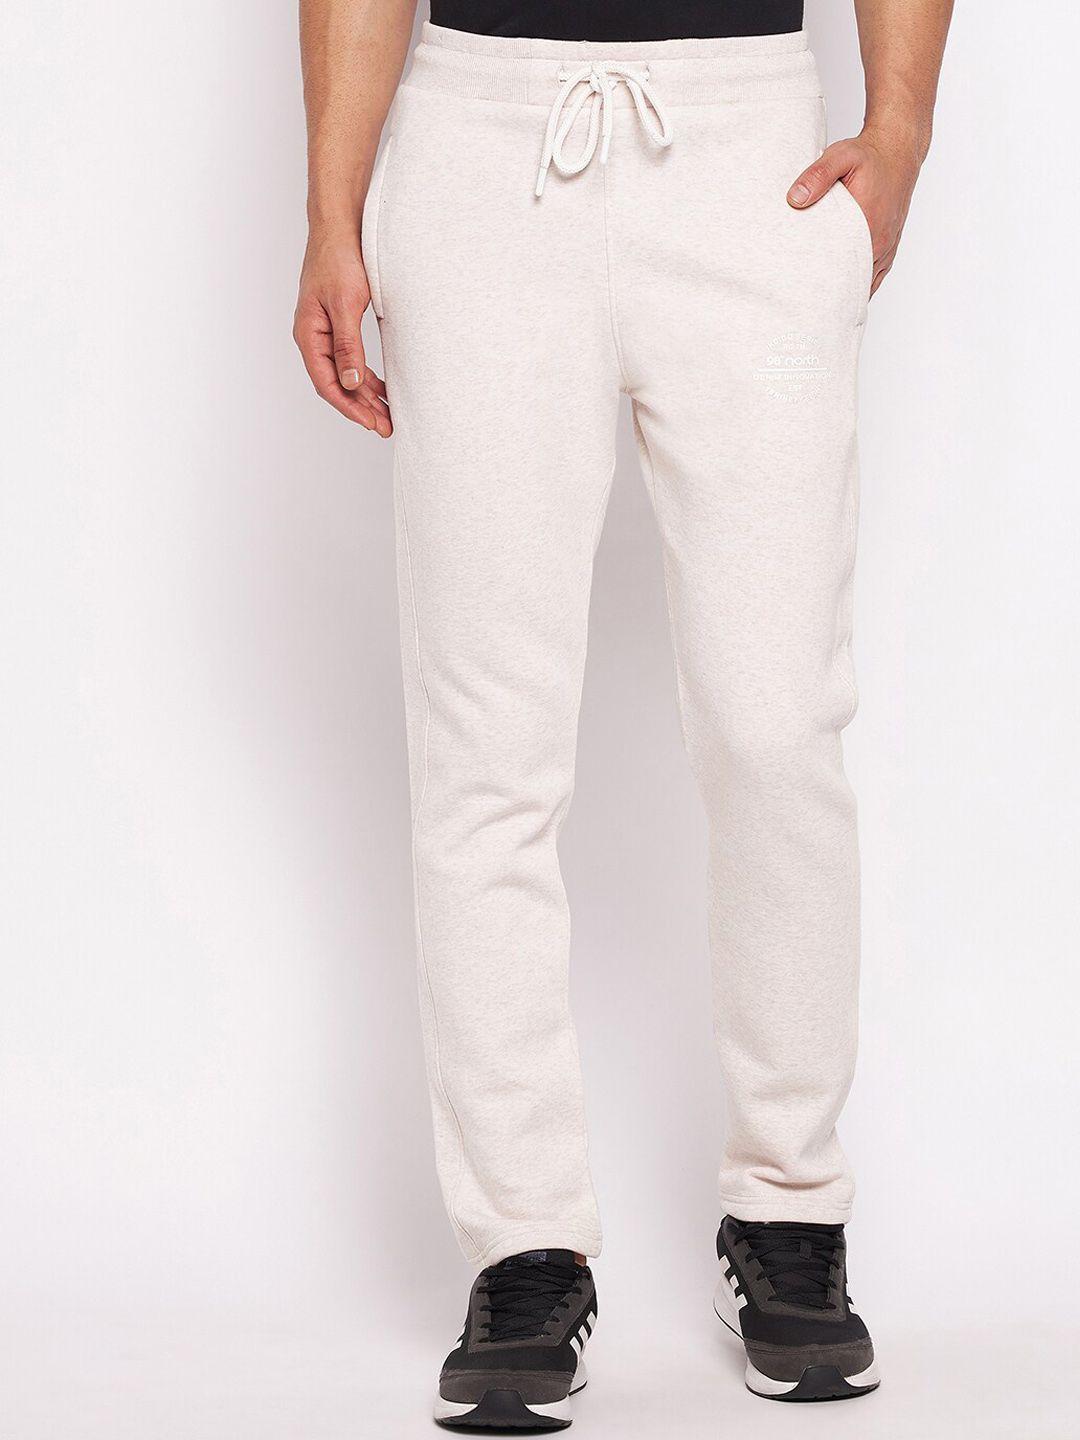 98 degree north men white solid cotton track pant